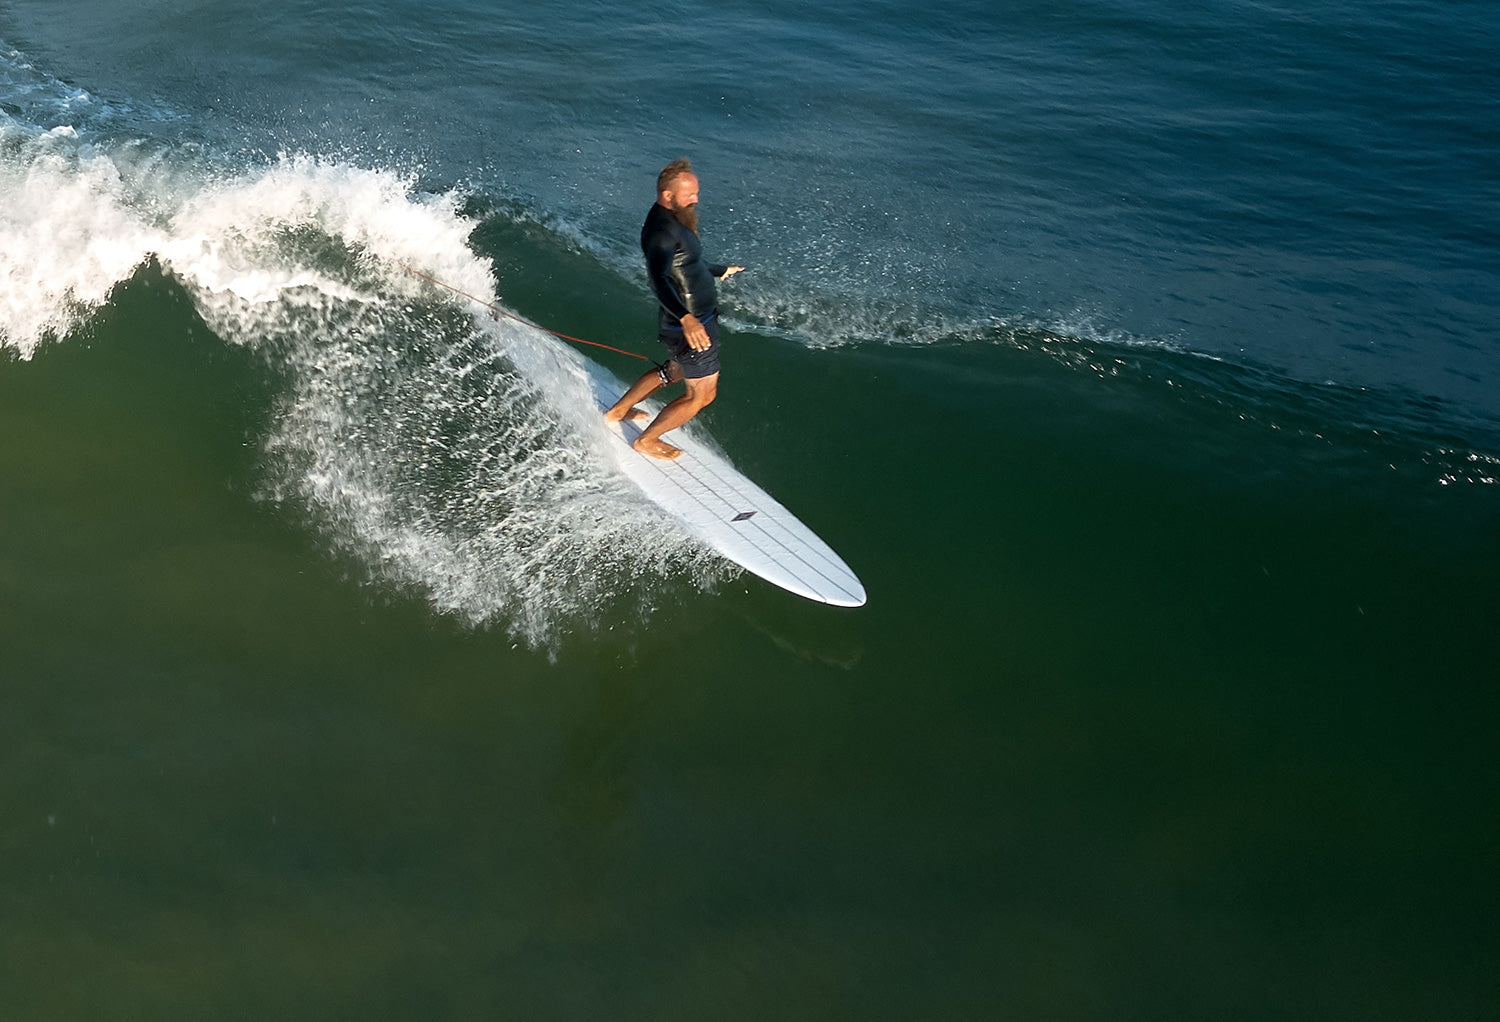 SHOP: 15% REDUCTION ON 2019 RETRO SURFBOARDS!!!